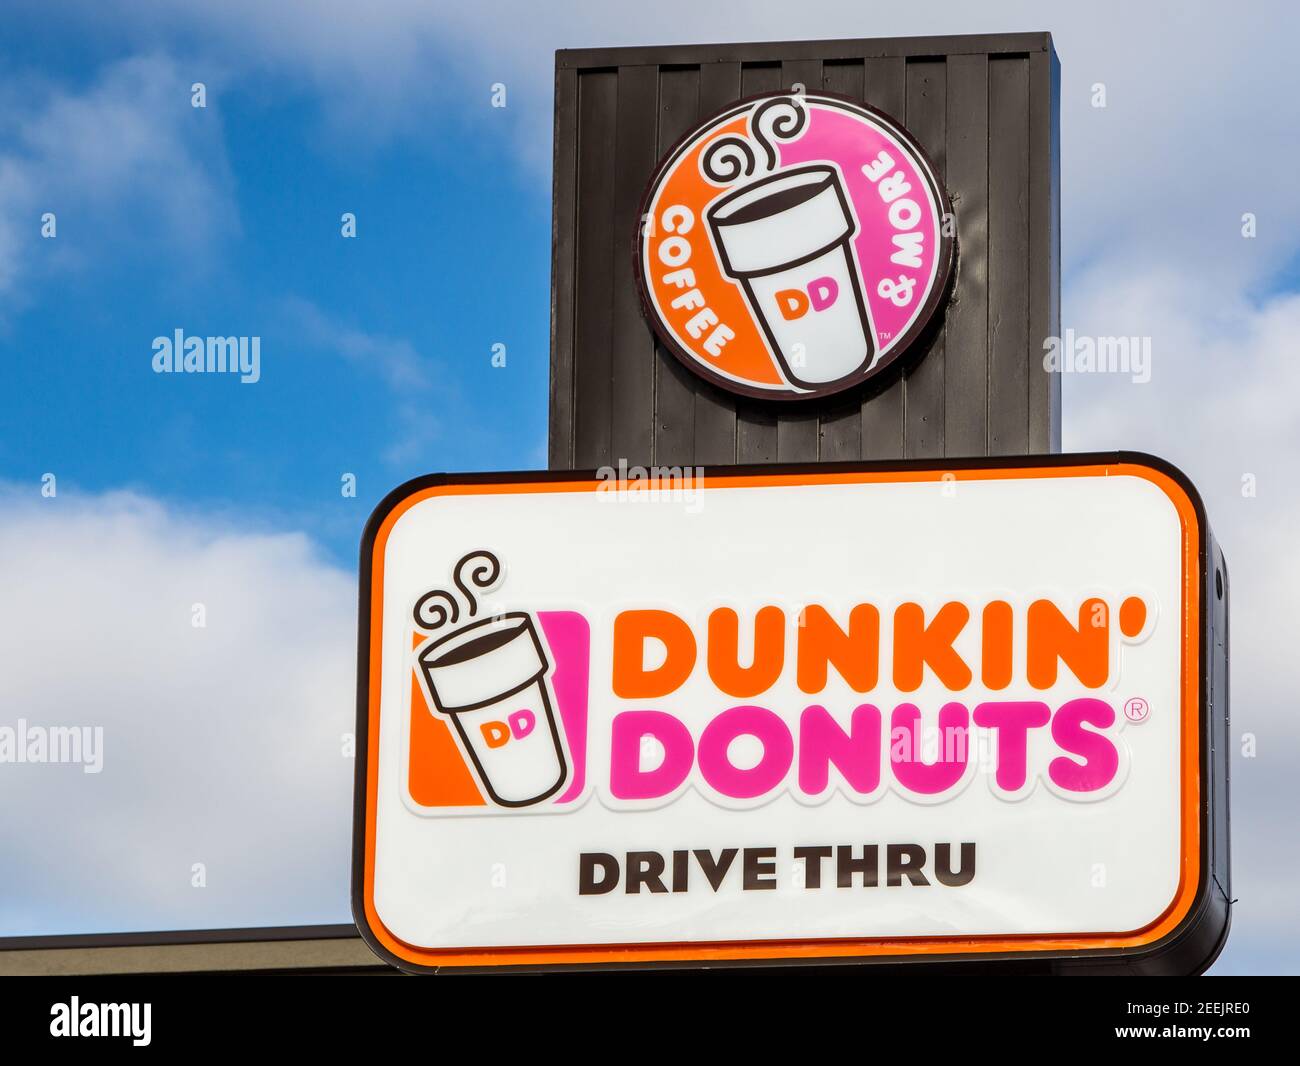 ST. PAUL, MN/USA - JANUARY 1, 2017: Dunkin' Donuts restauraunt exterior. Dunkin' Donuts is a doughnut company and coffeehouse chain. Stock Photo